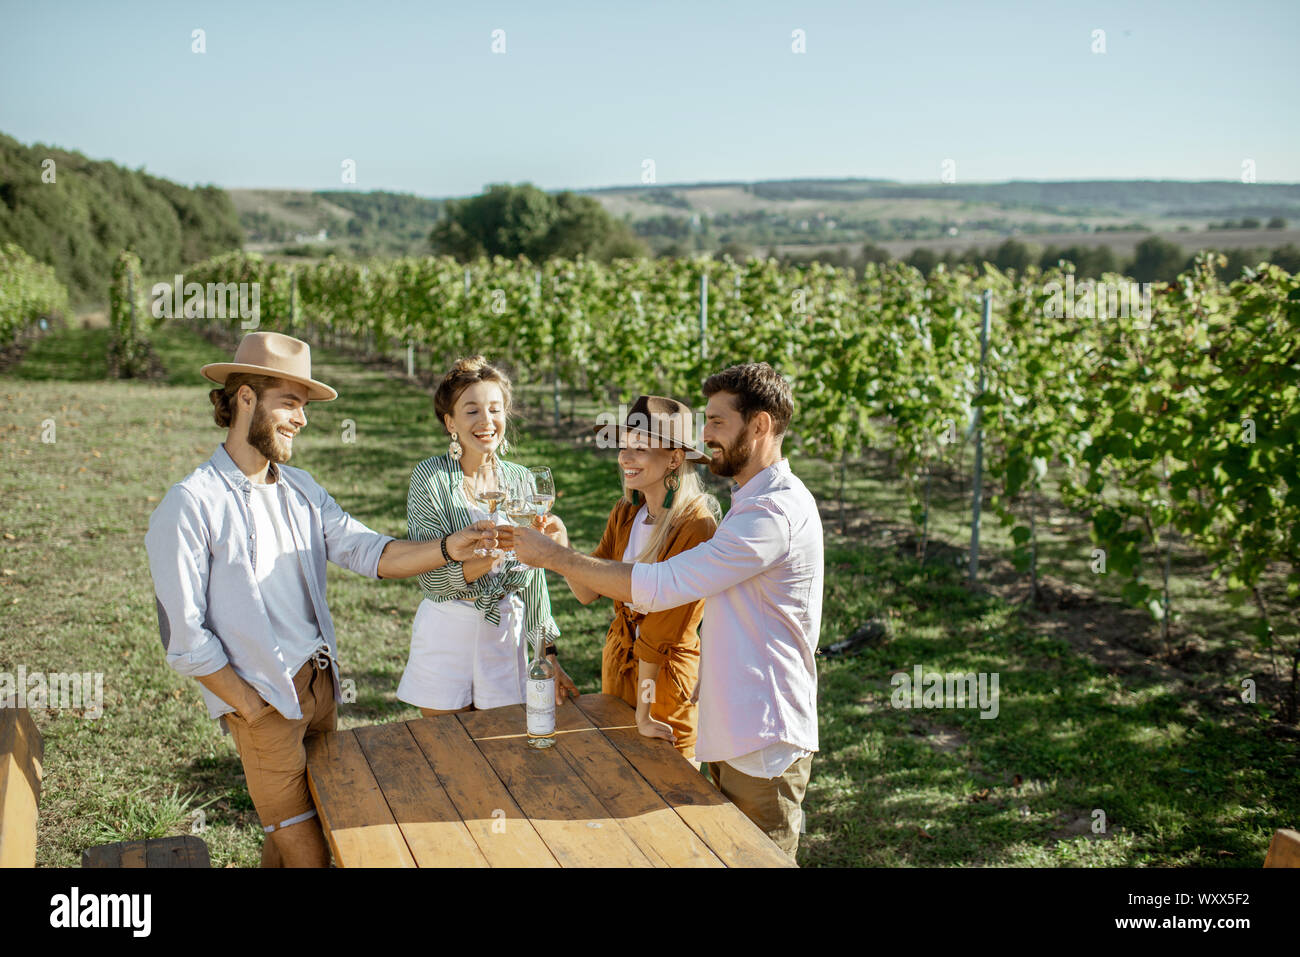 Group of young friends dressed casually tasting wine on the vineyard on a sunny summer morning, wide landscape view Stock Photo